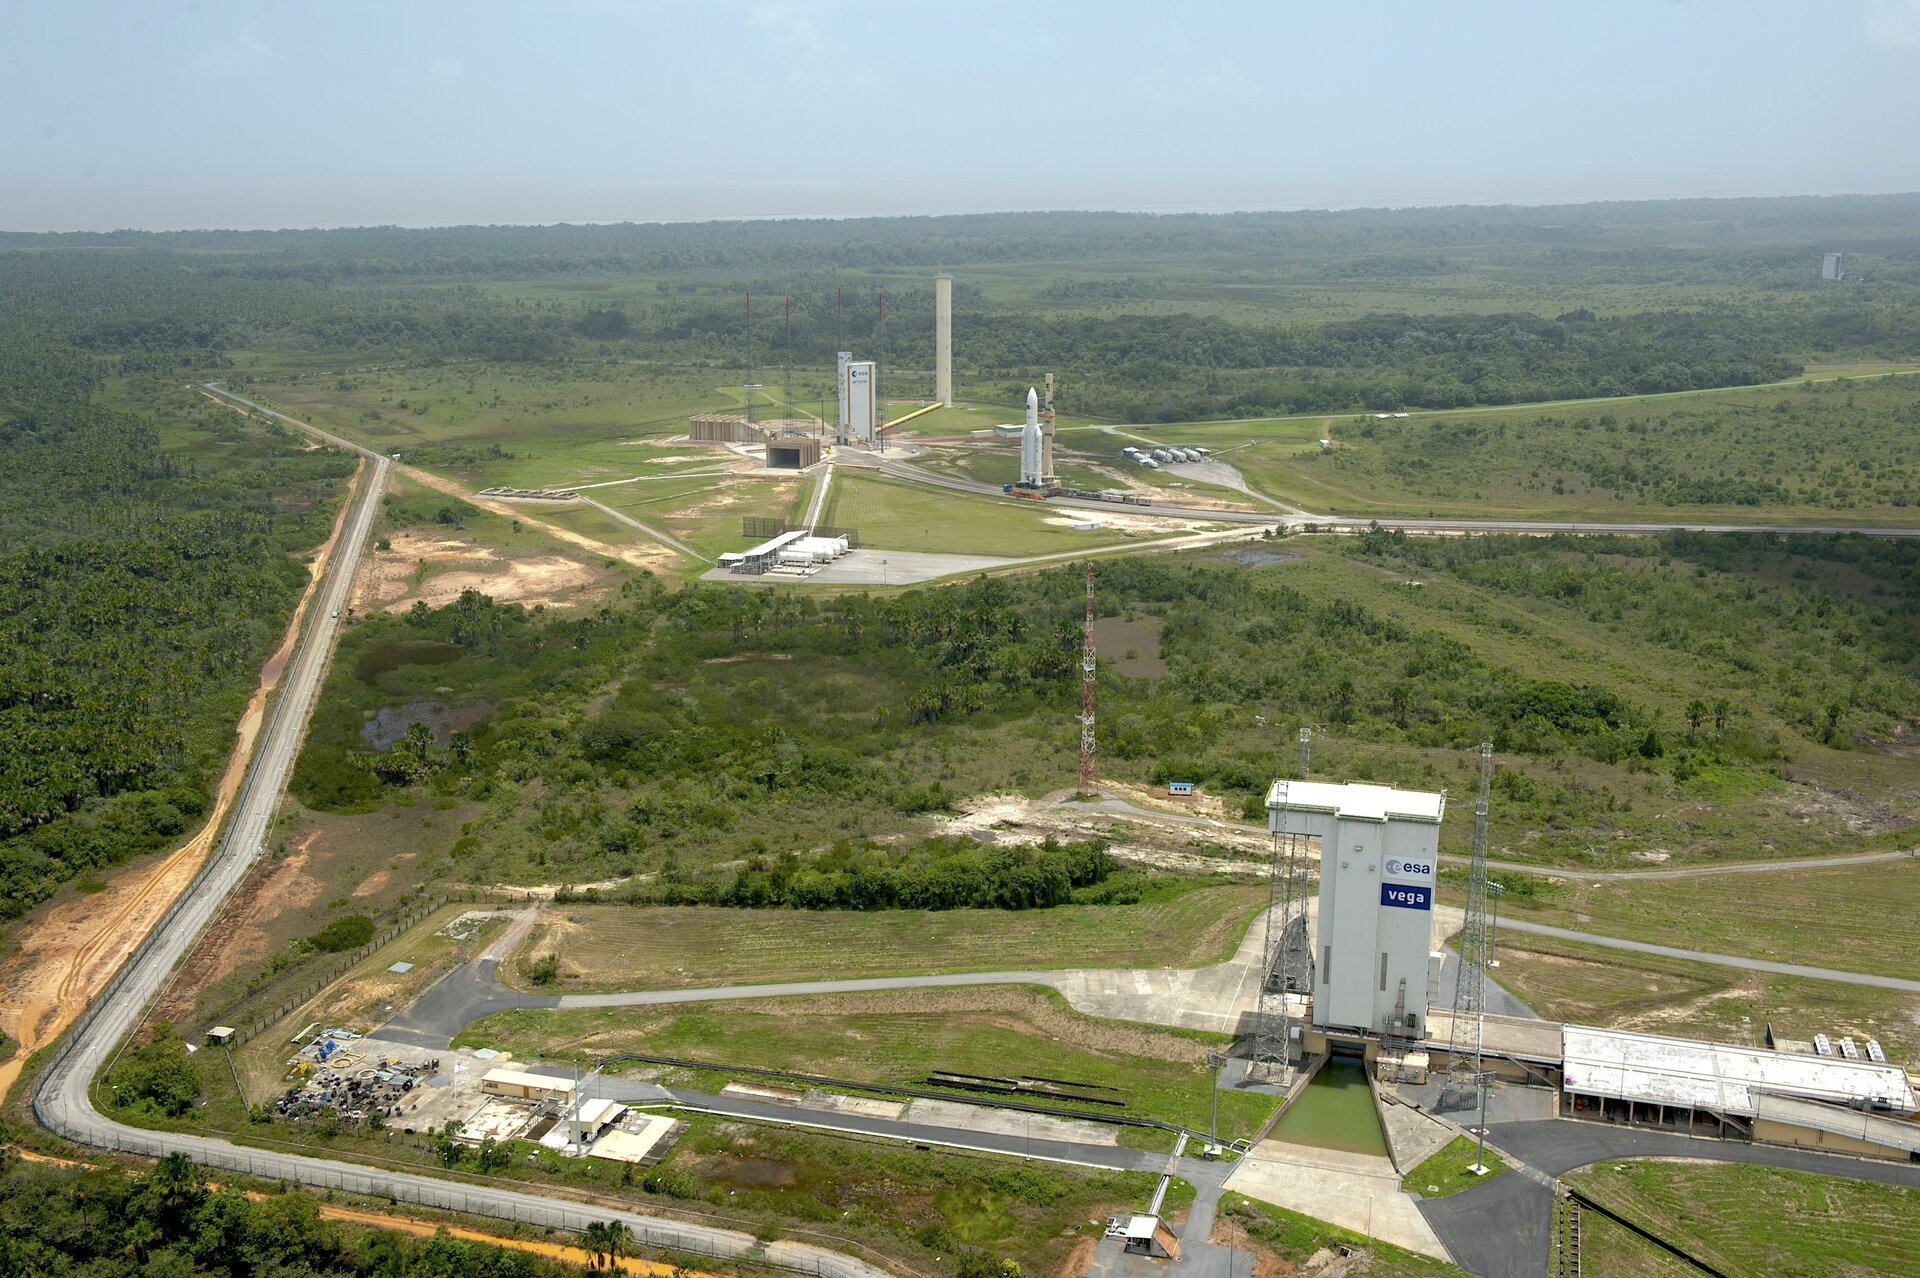 Vega_and_Ariane_5_launch_pads_at_Europe_s_Spaceport_pillars.jpg.a1a02edaef5af5bcd23b67d2a6169459.jpg